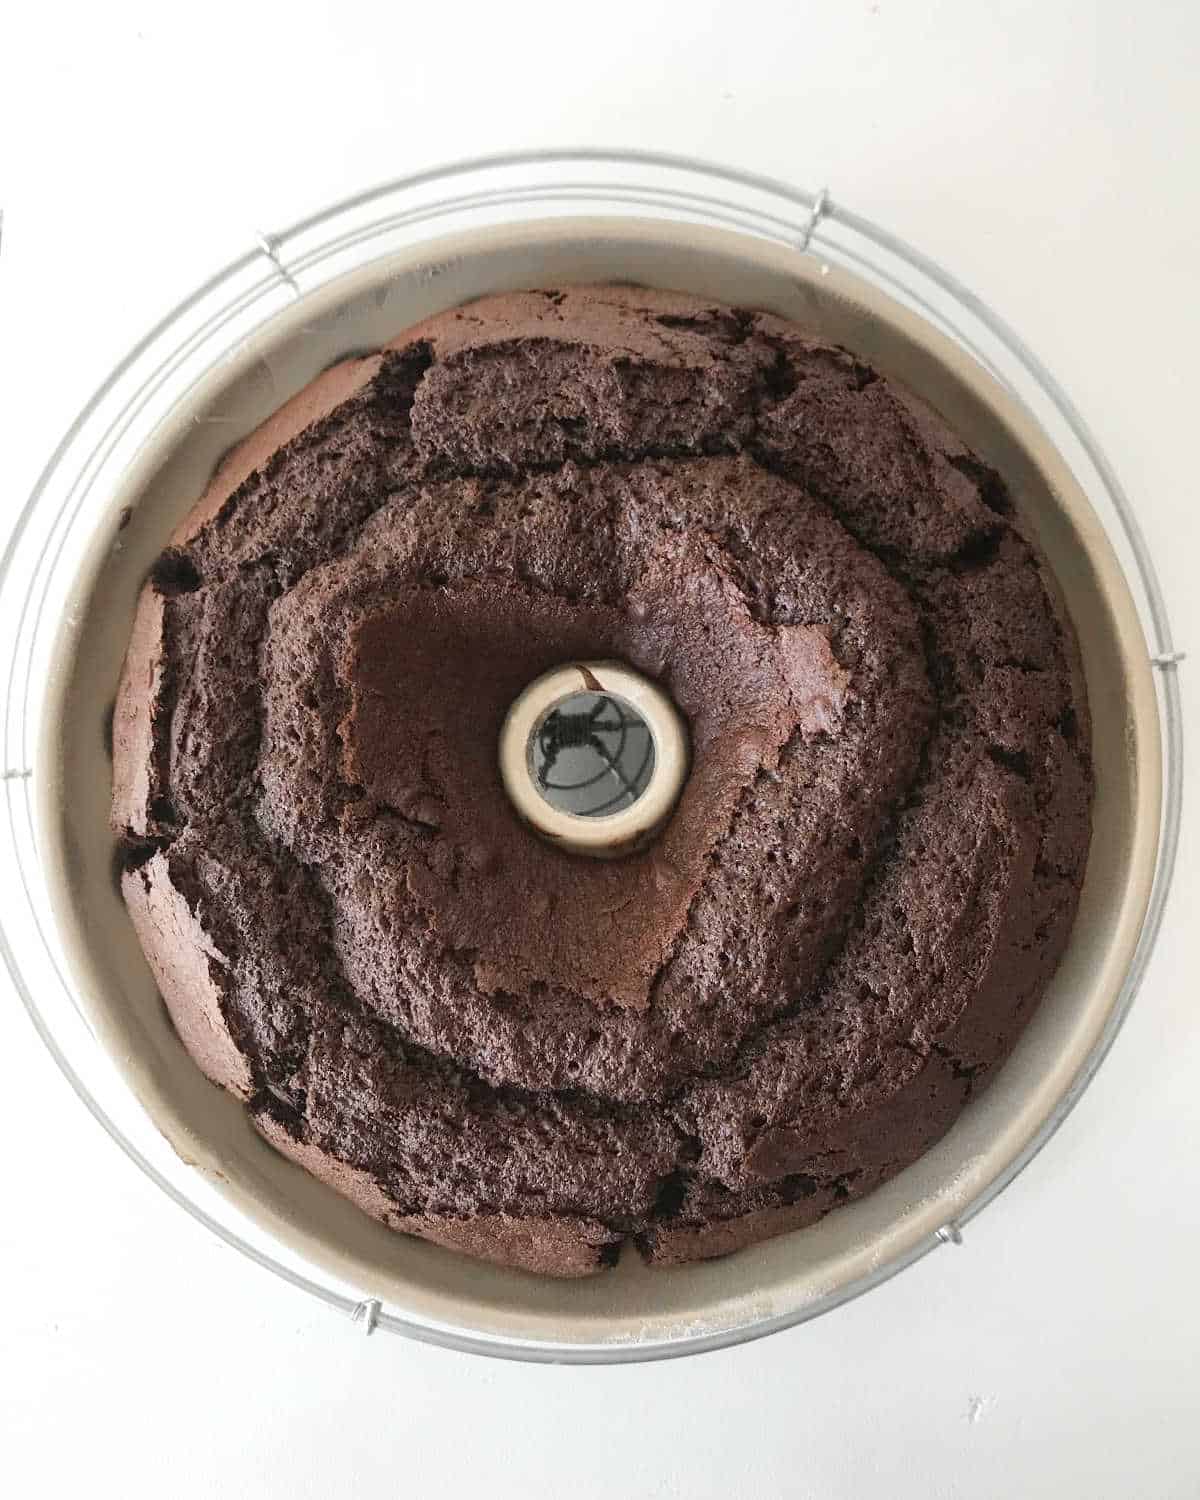 Baked chocolate bundt cake in the pan on a wire rack on a white surface. Top view.